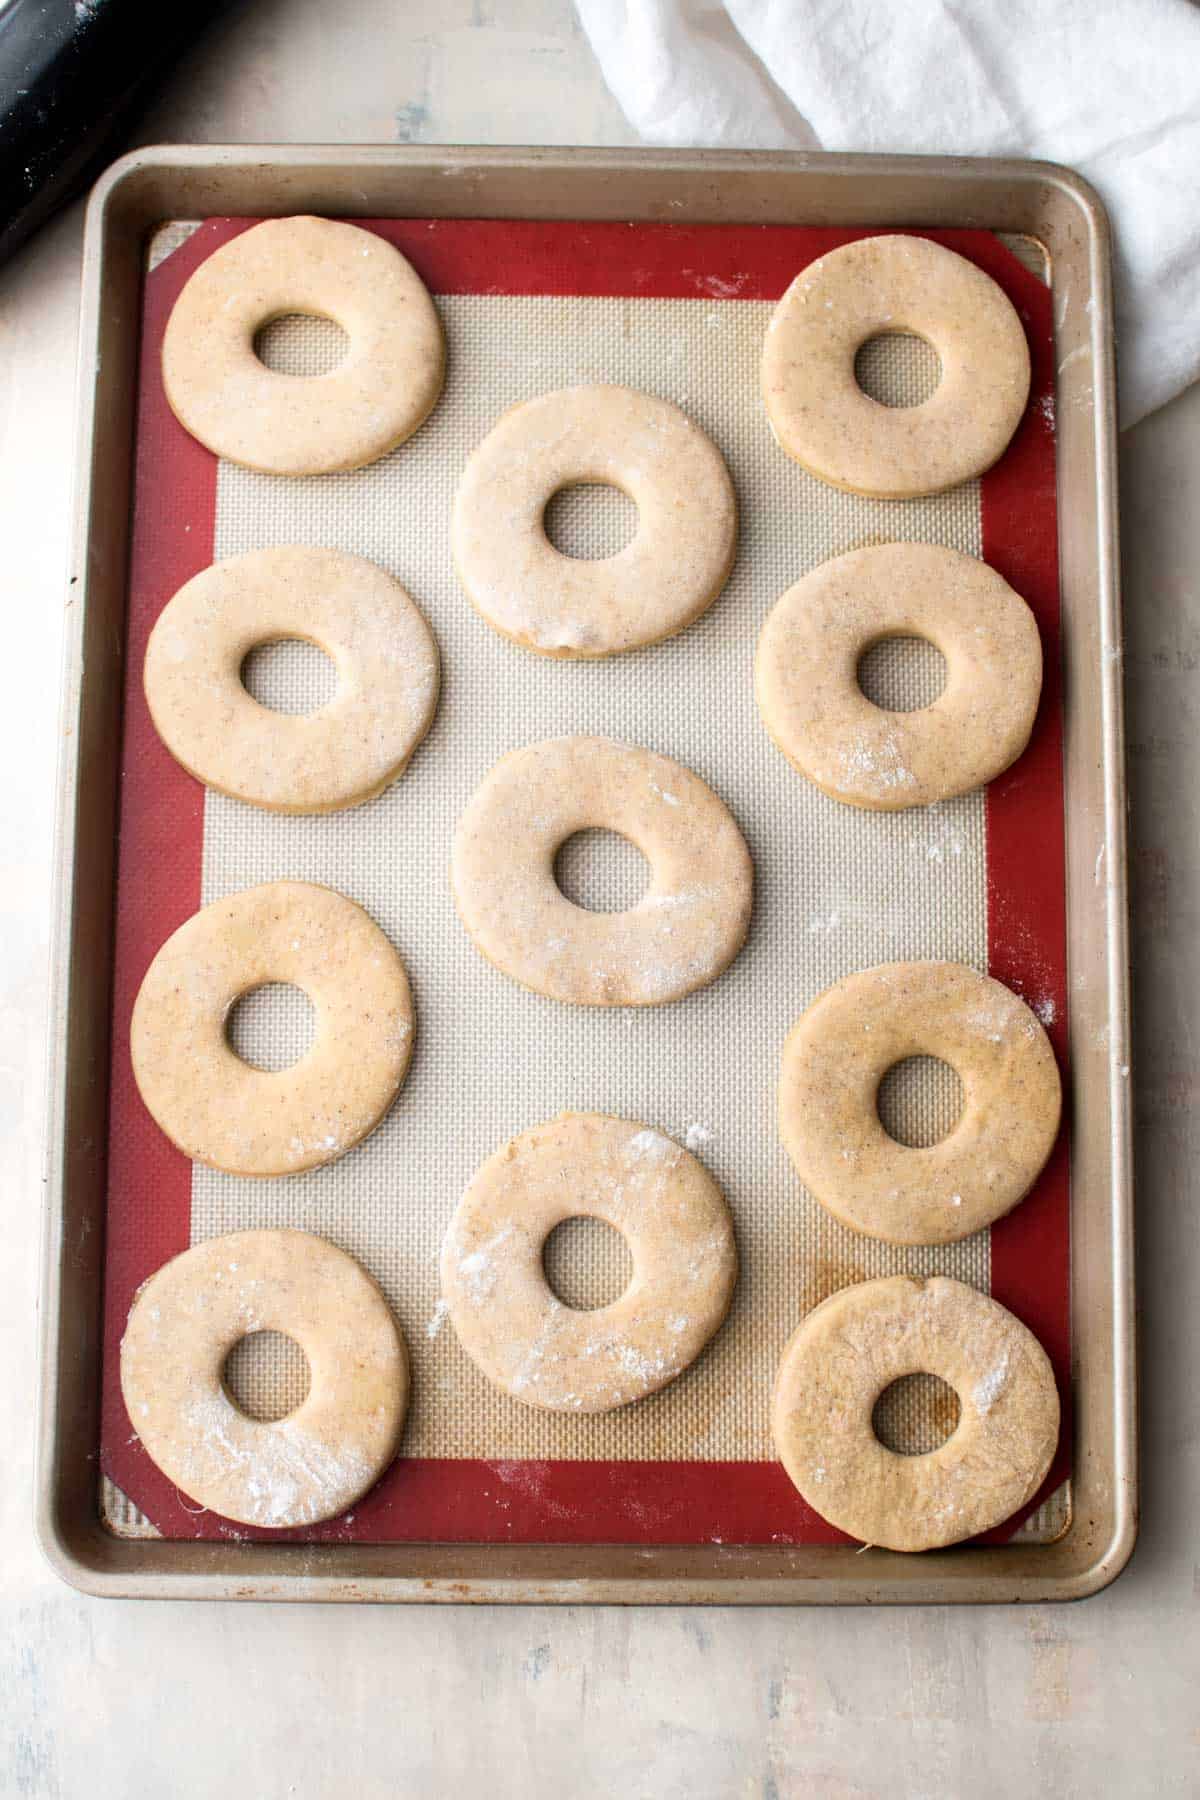 The doughnut dough has been cut into the O shape with a hole in the middle. They are sitting on a silver baking tray with a red rim. At this point they dough is quite flat.